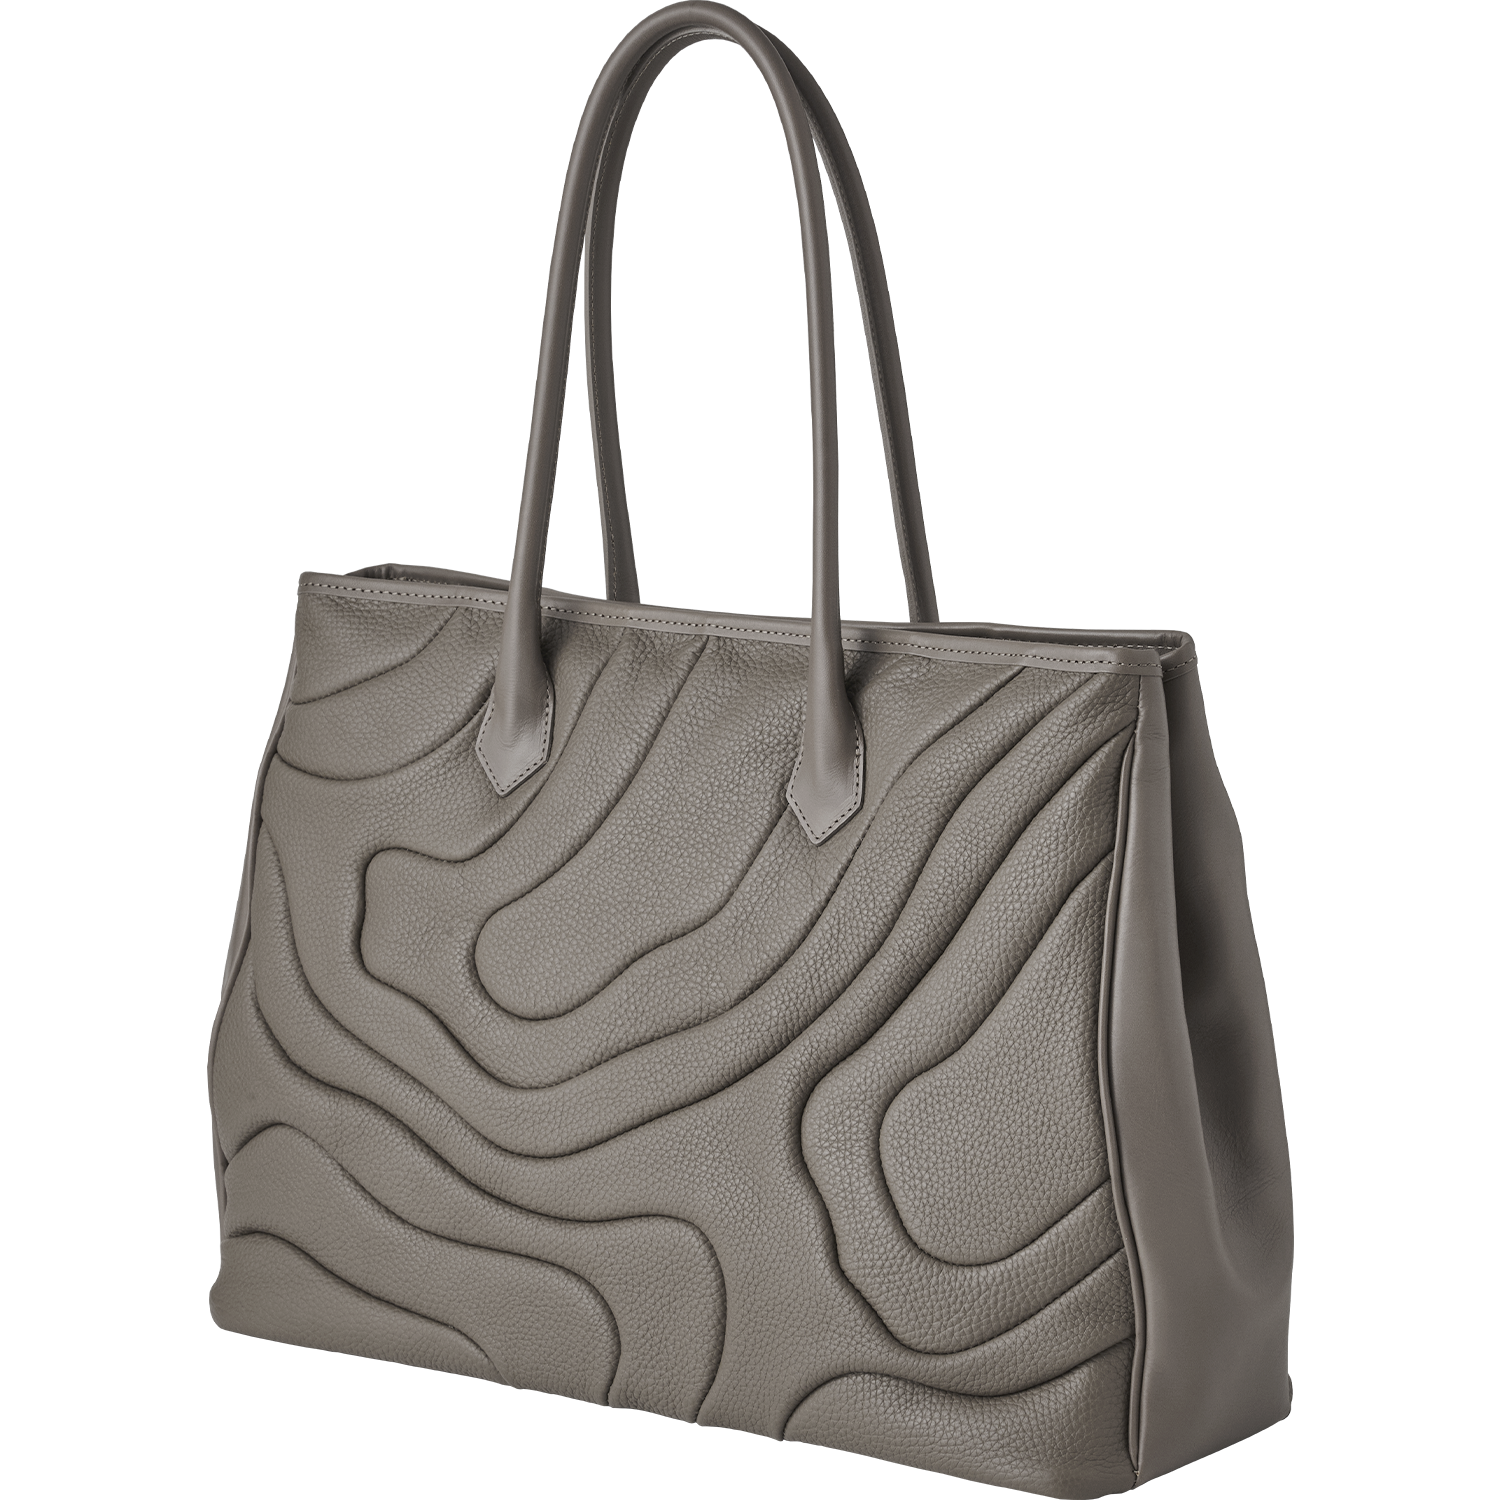 24/45 TOTE （Taupe）